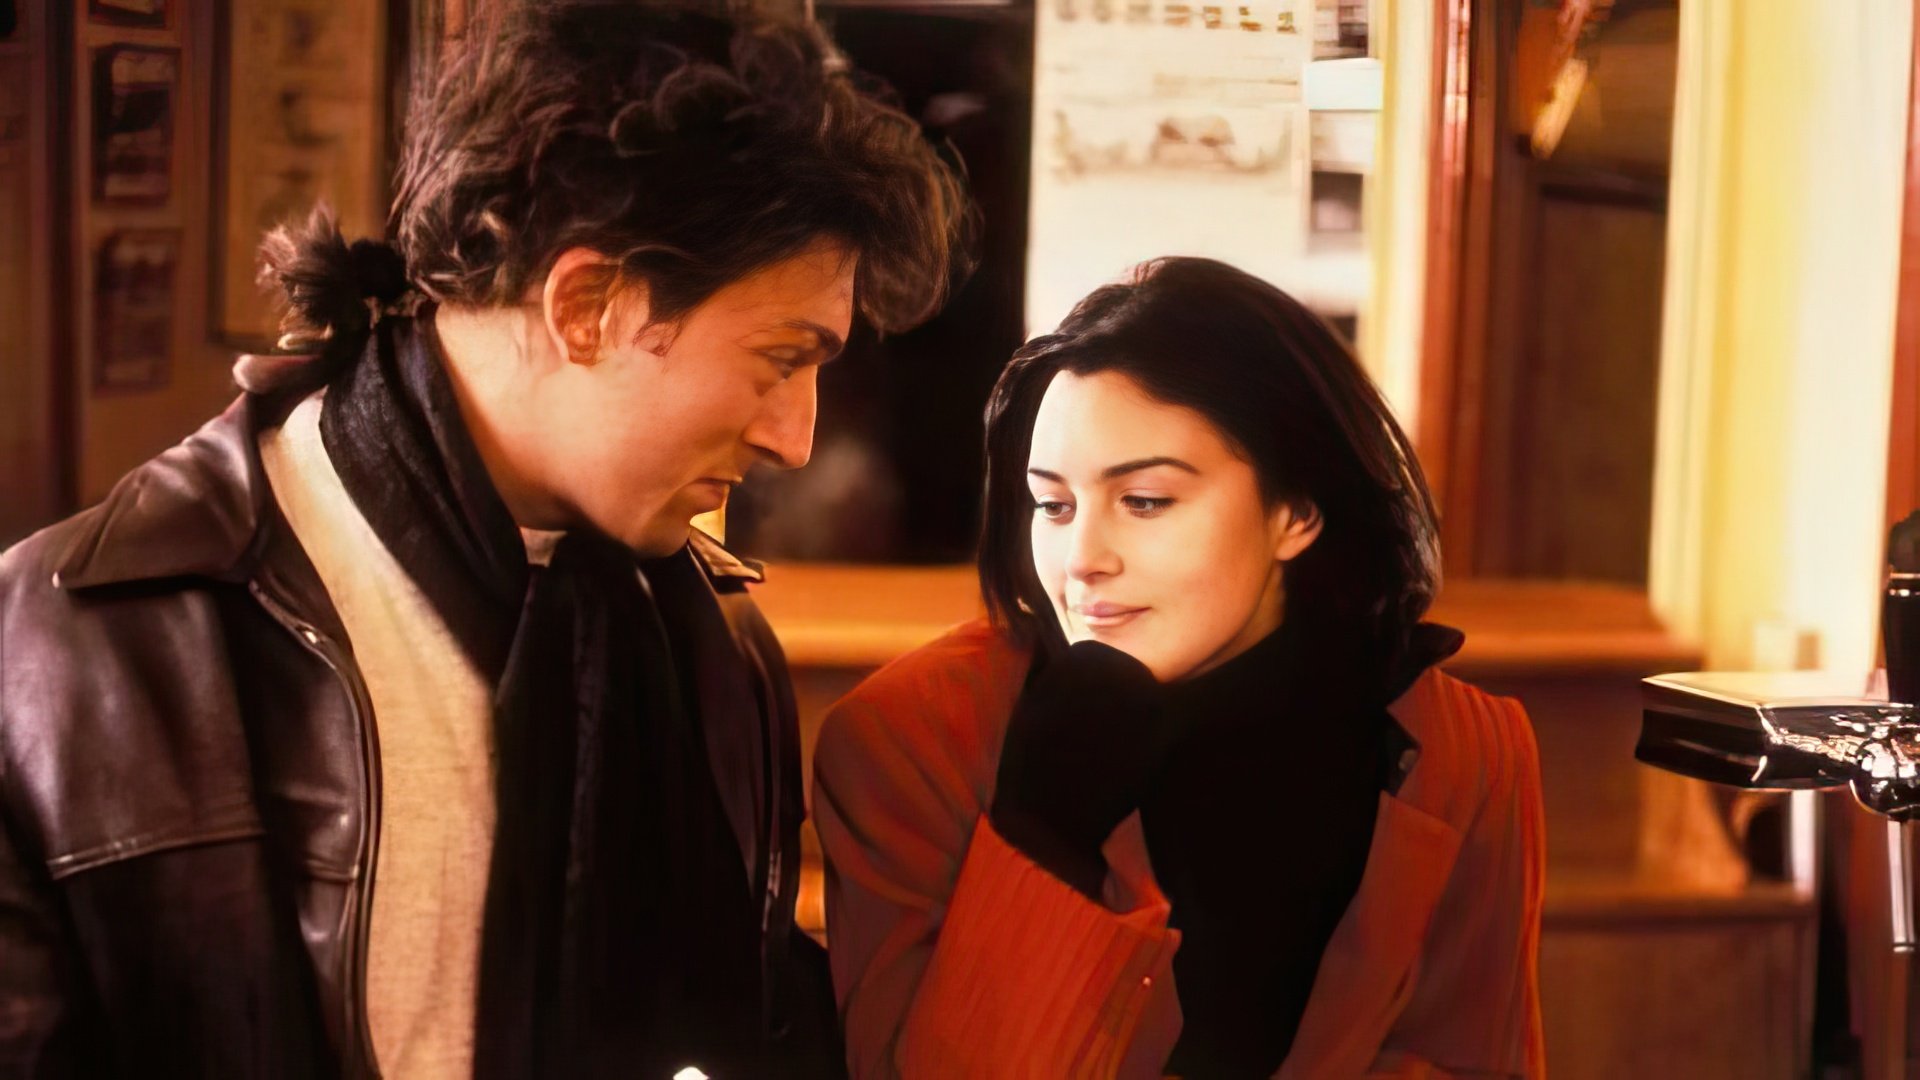 The love story of Monica Bellucci and Vincent Cassel began on the set of 'The Apartment'